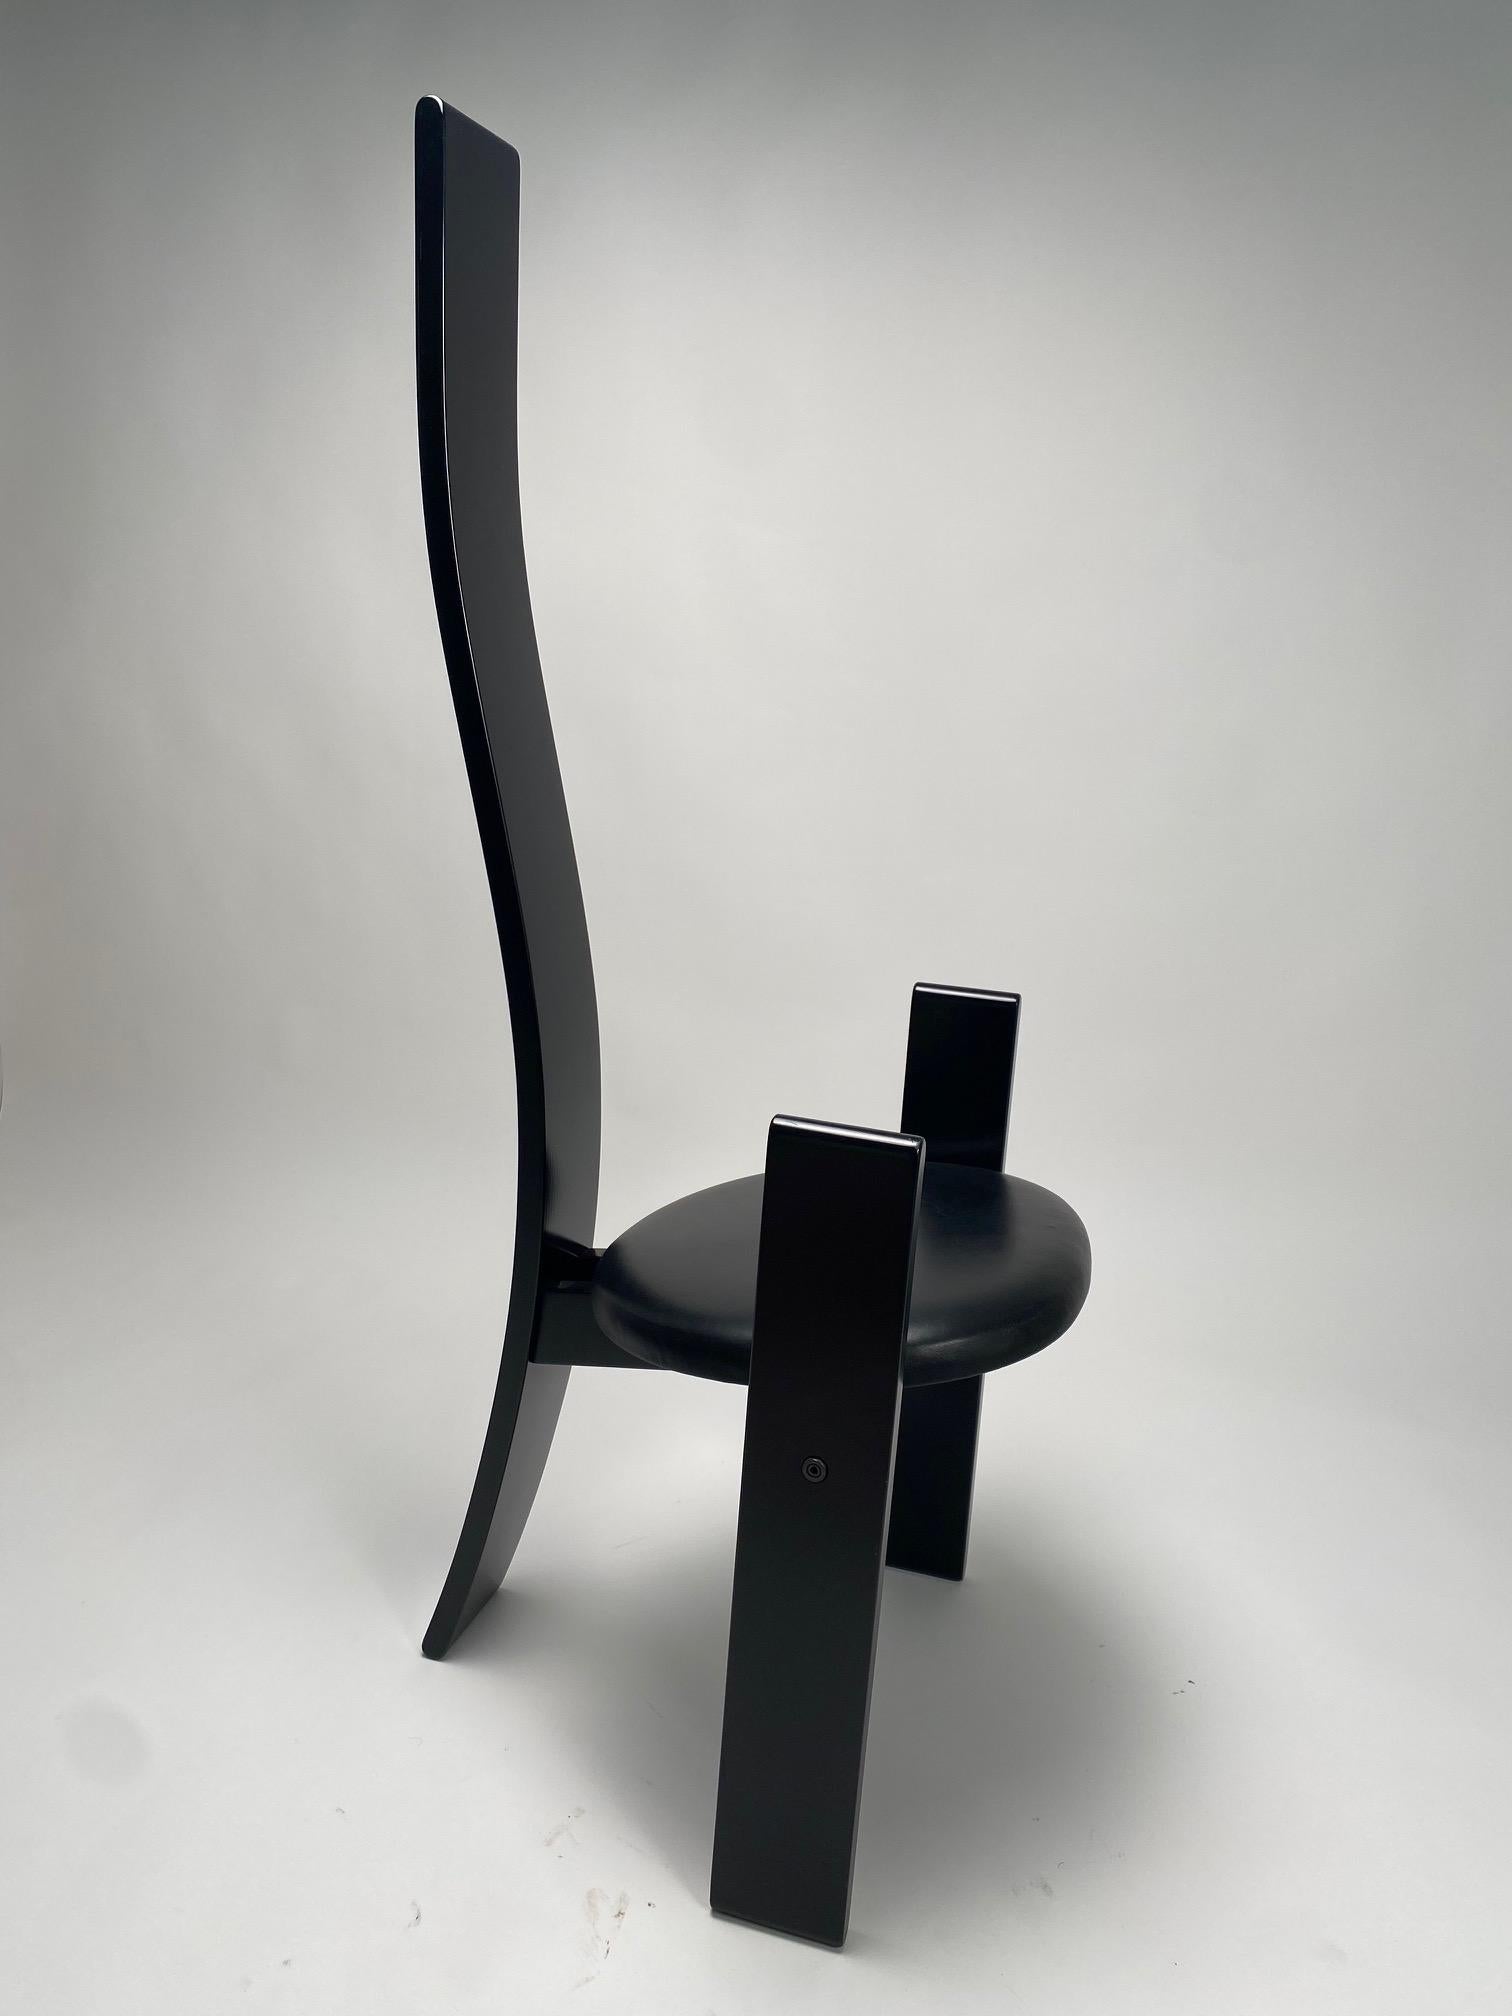 The Golem chair, with a high backrest in lacquered wood, was born, as Magistretti states, from the desire to pay homage to the designer Mackintosh, after visiting an exhibition on the Scottish architect's work. The element that acts as a backrest is